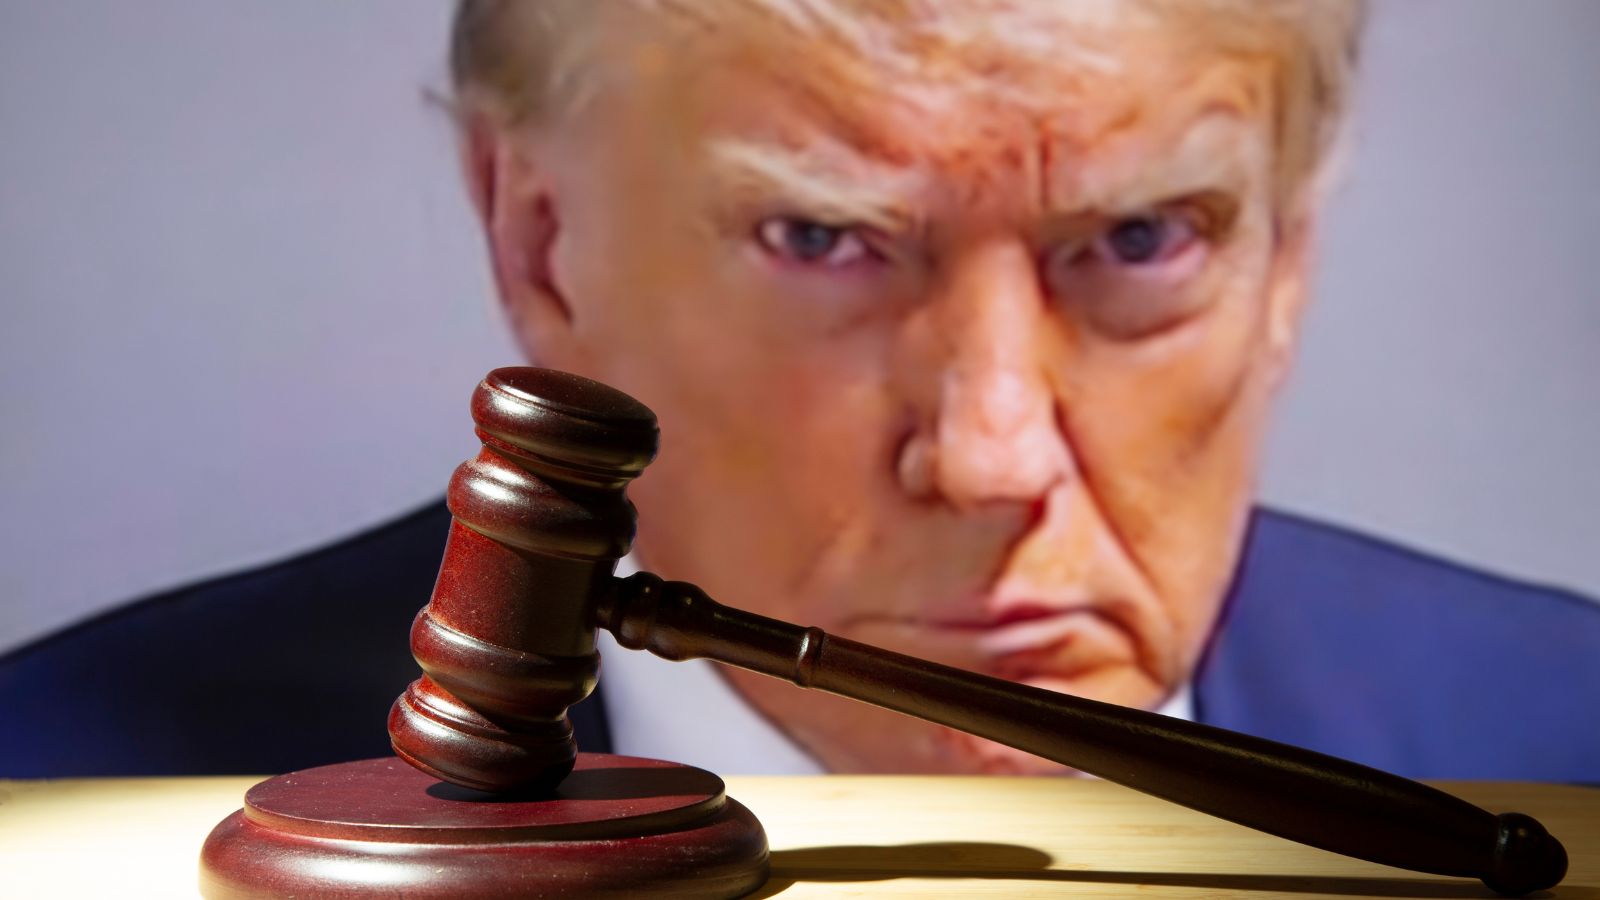 Donald Trump Forces Judge to Issue Gag Order Over Now-Deleted Post